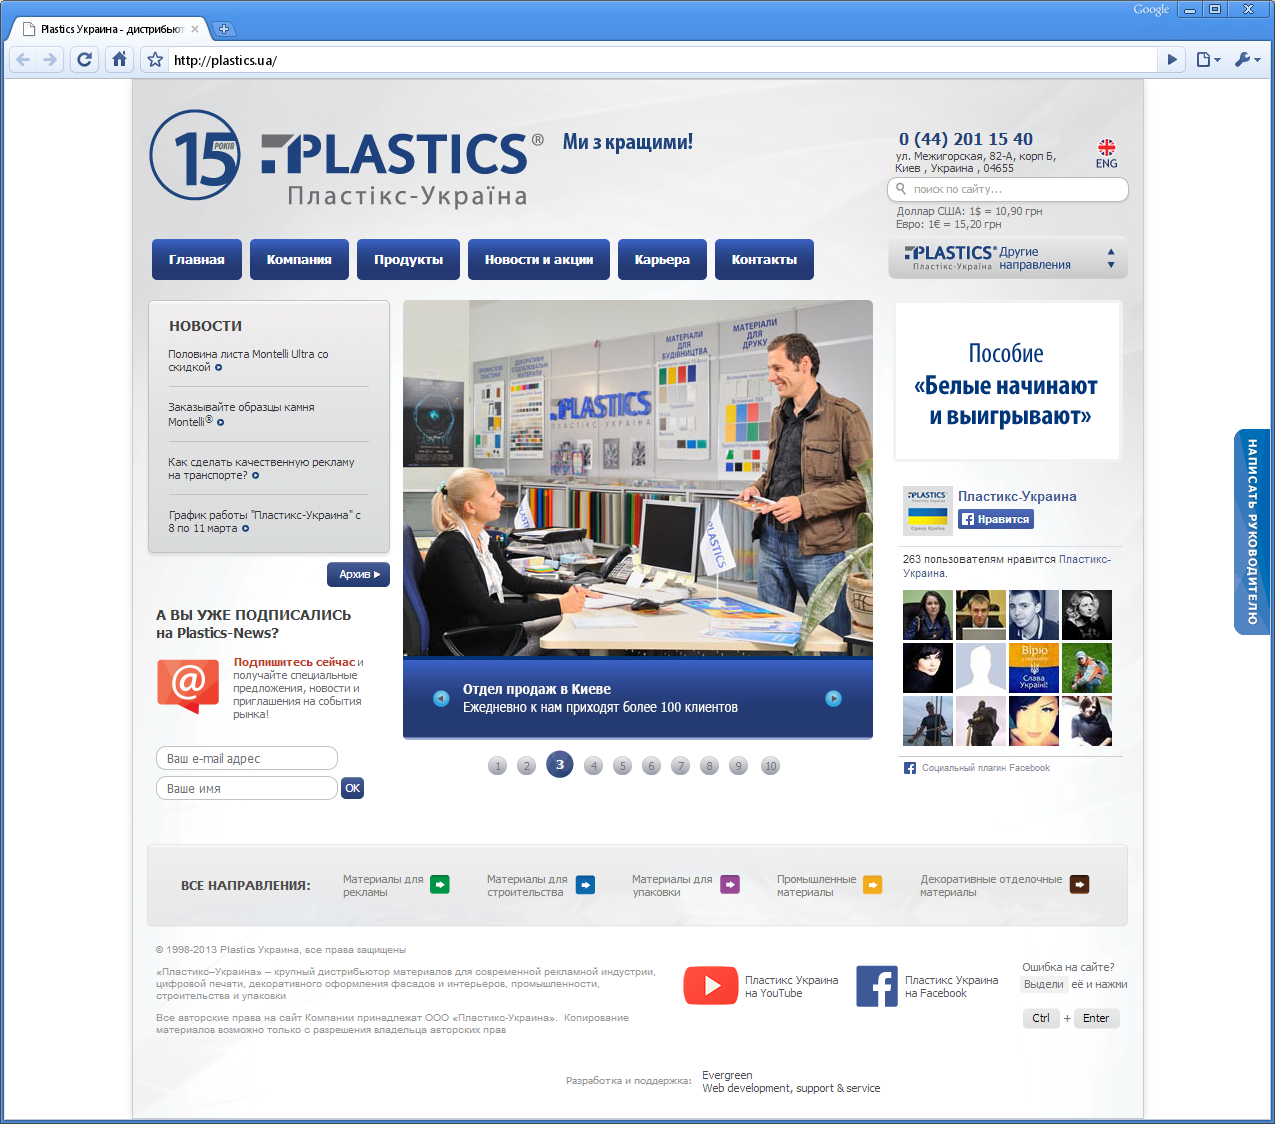 Scale corporate website, the leader of sales in the plastics market. The site works in three countries: Ukraine, Moldova, Georgia. | Evergreen projects 9